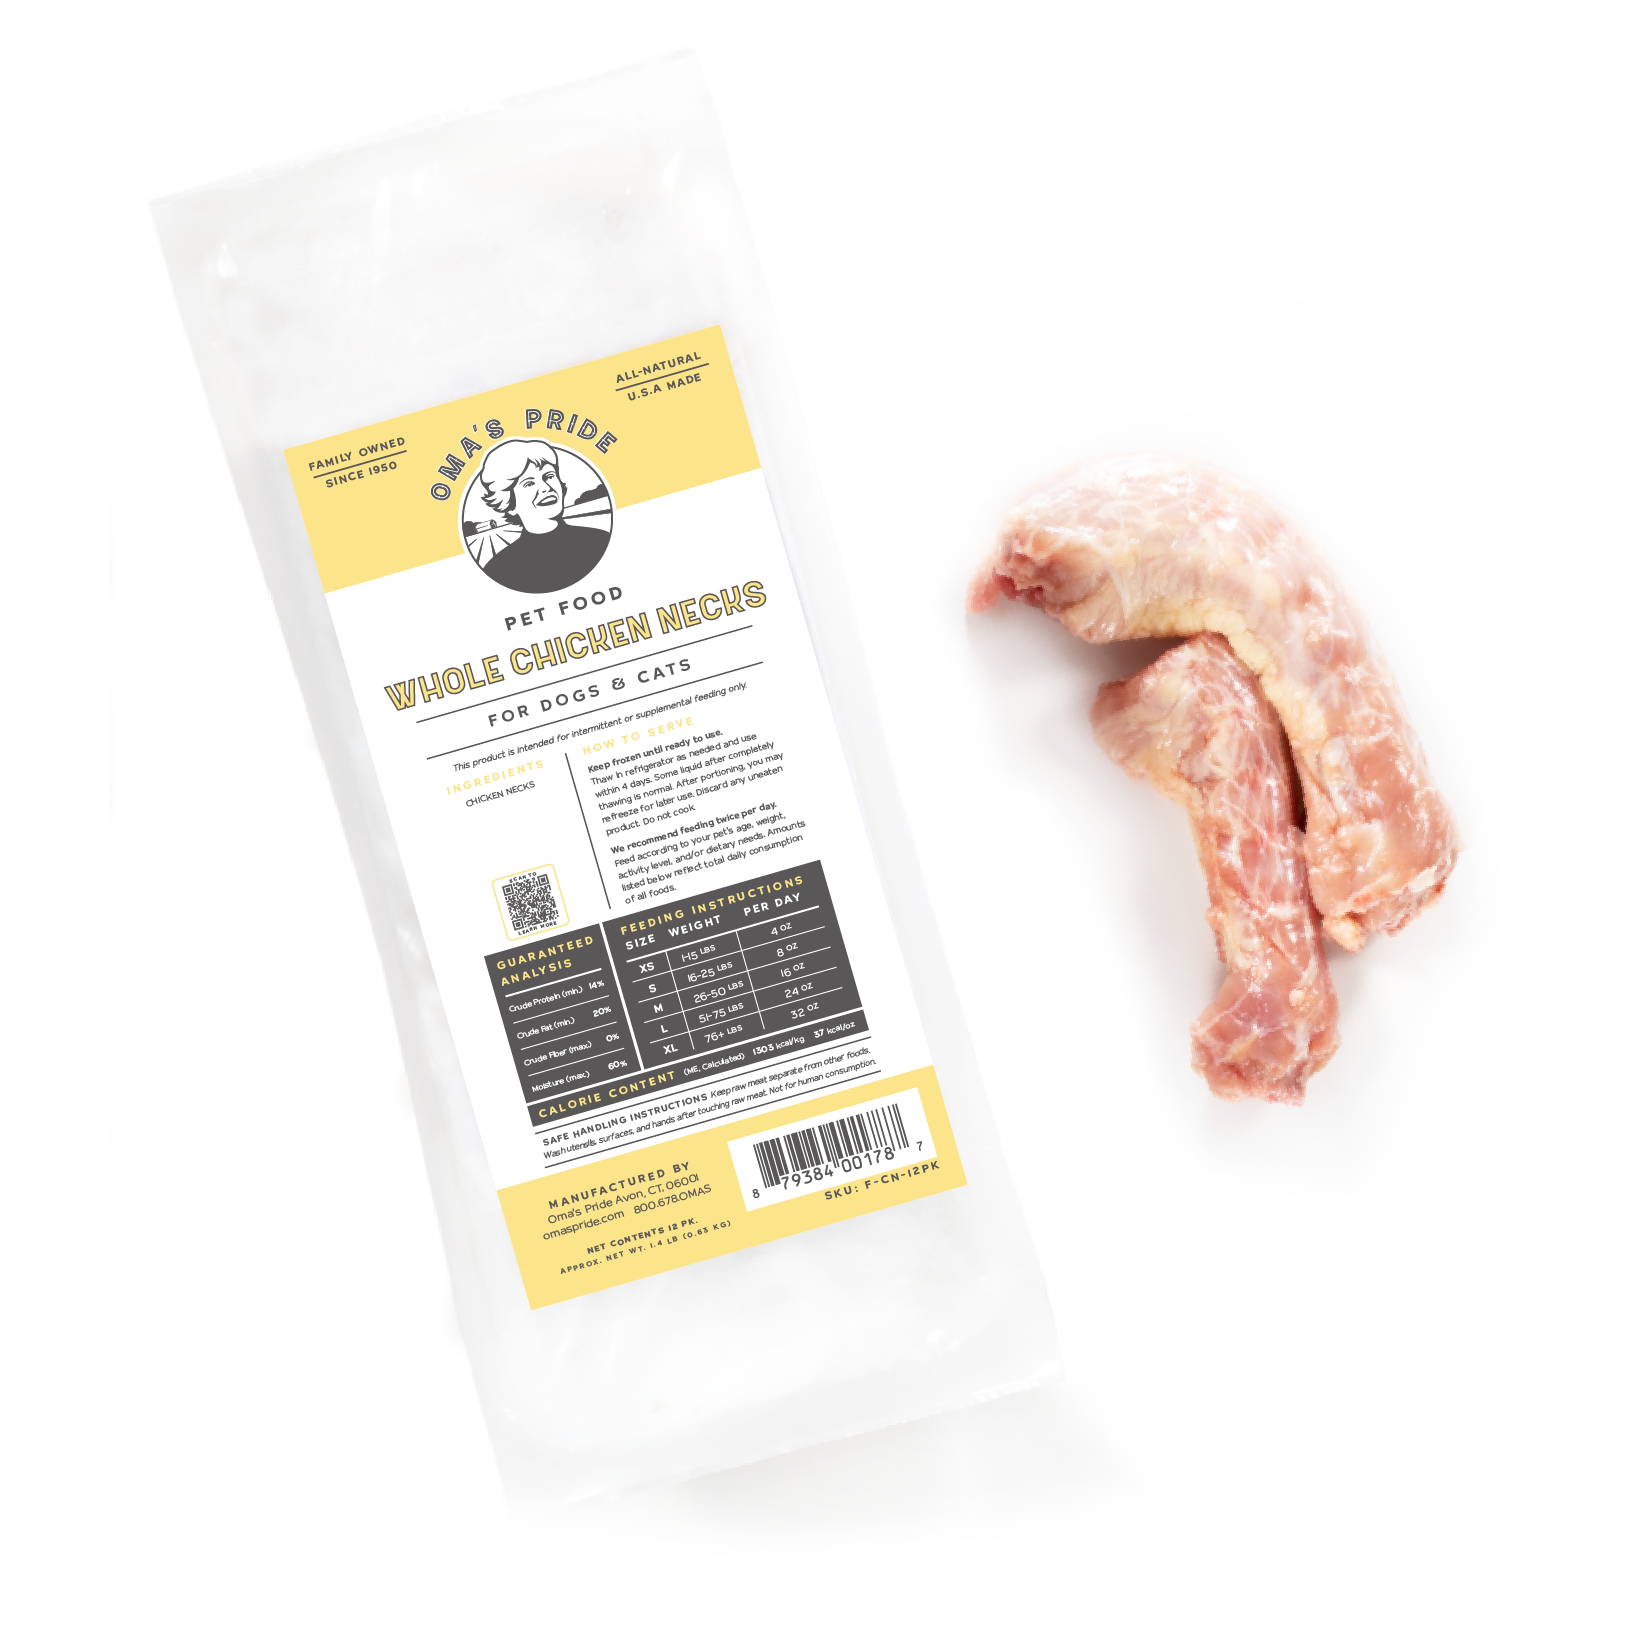 Oma's Pride whole skinless chicken necks product on white background.